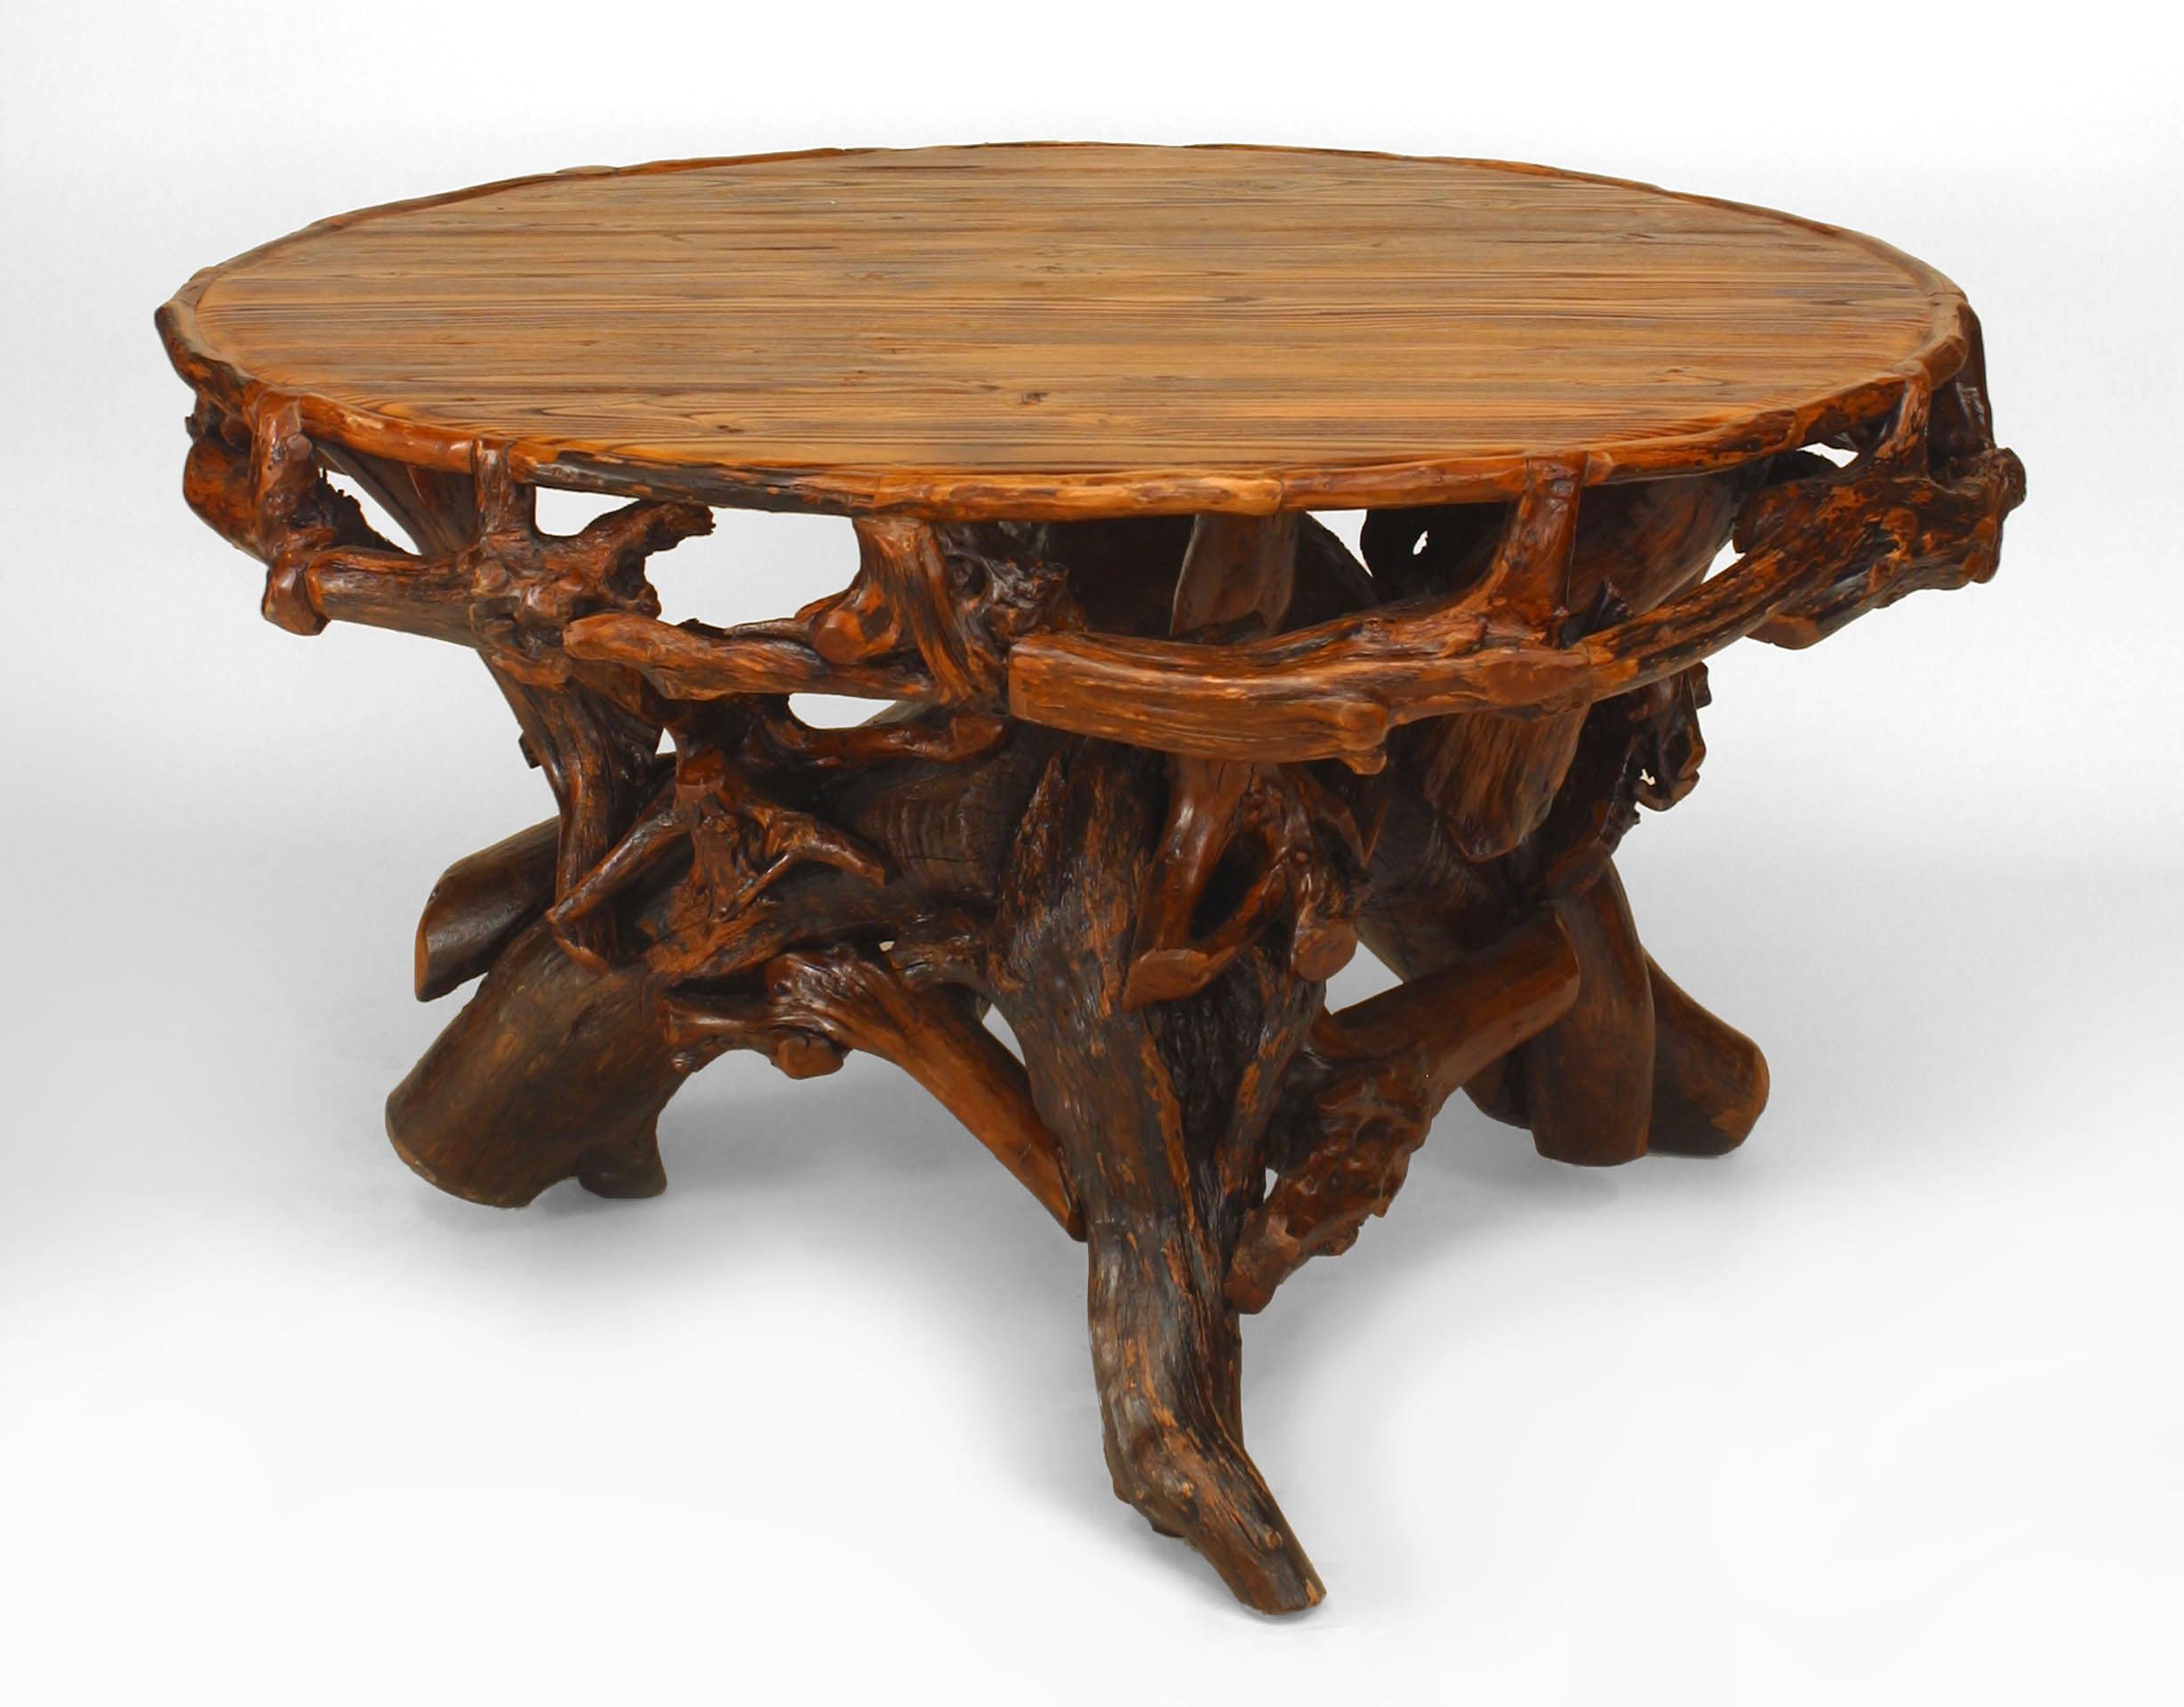 Rustic Adirondack-style (Modern) round dining table with root pedestal base supported on 3 legs with a filigree apron.
